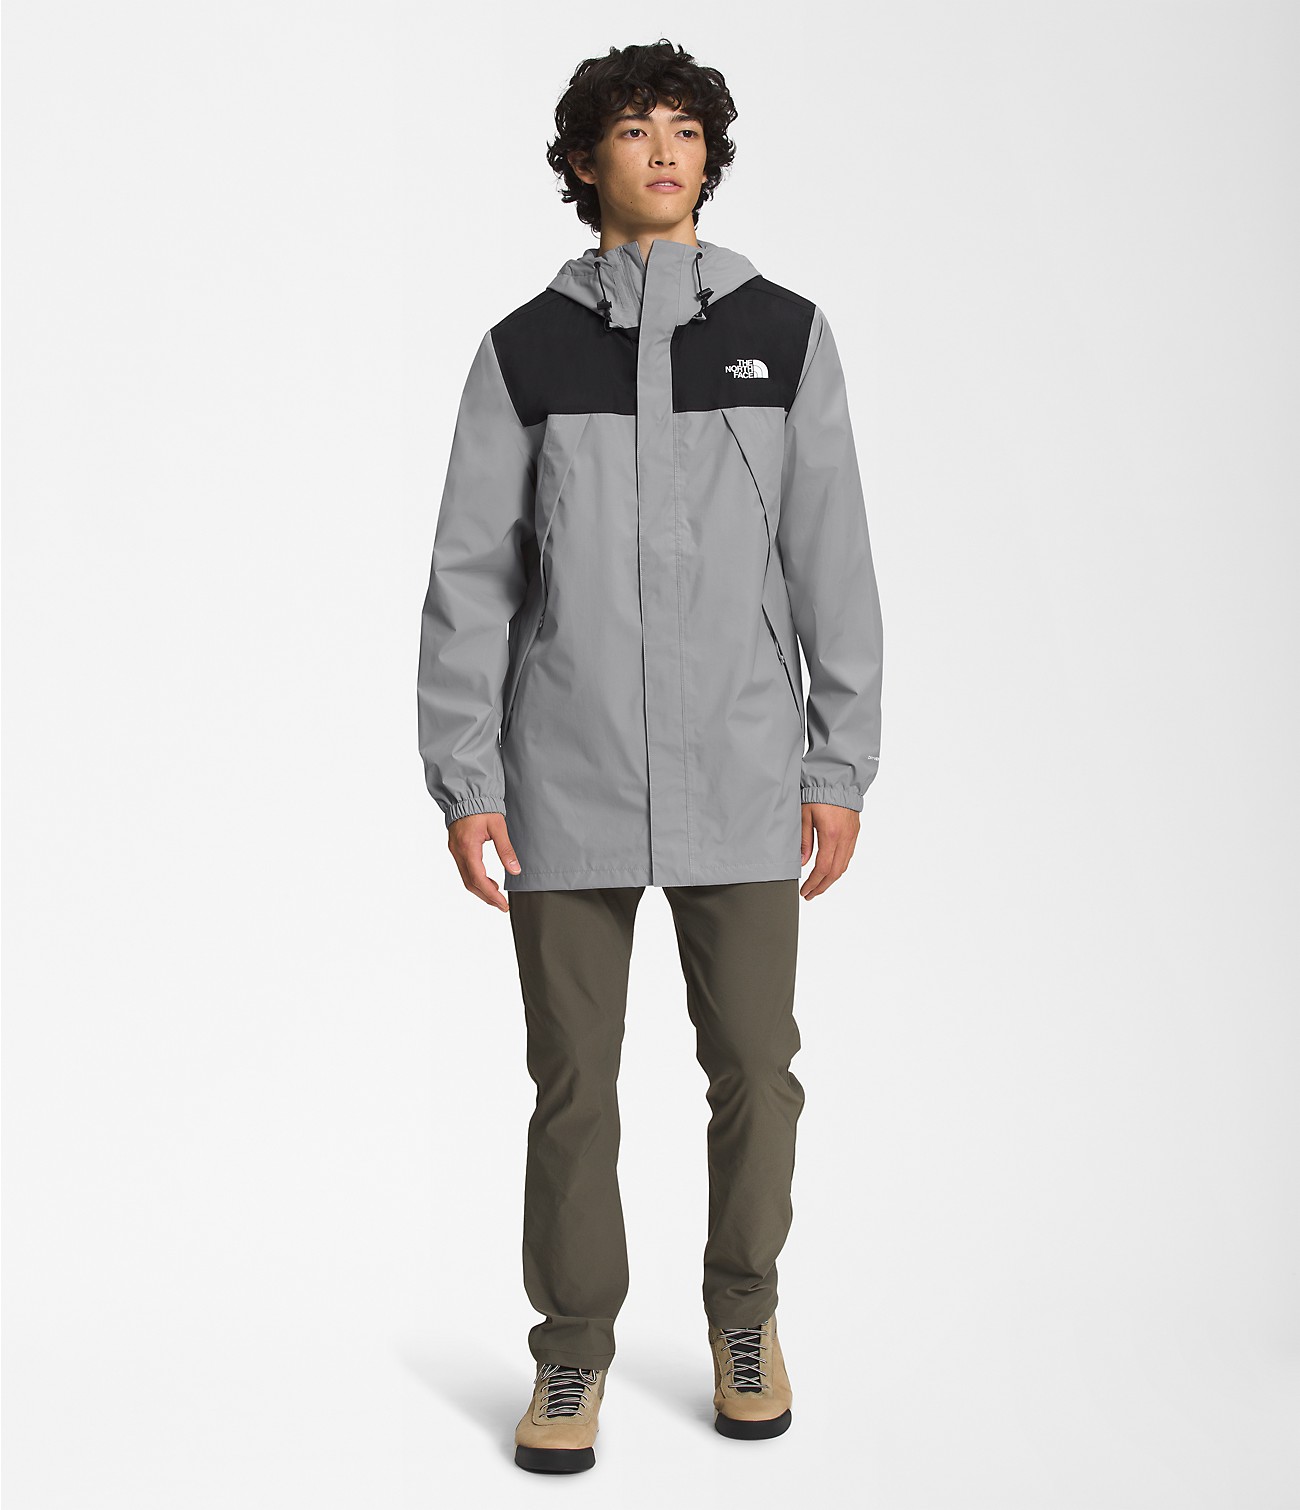 Unlock Wilderness' choice in the Timberland Vs North Face comparison, the Antora Parka by The North Face